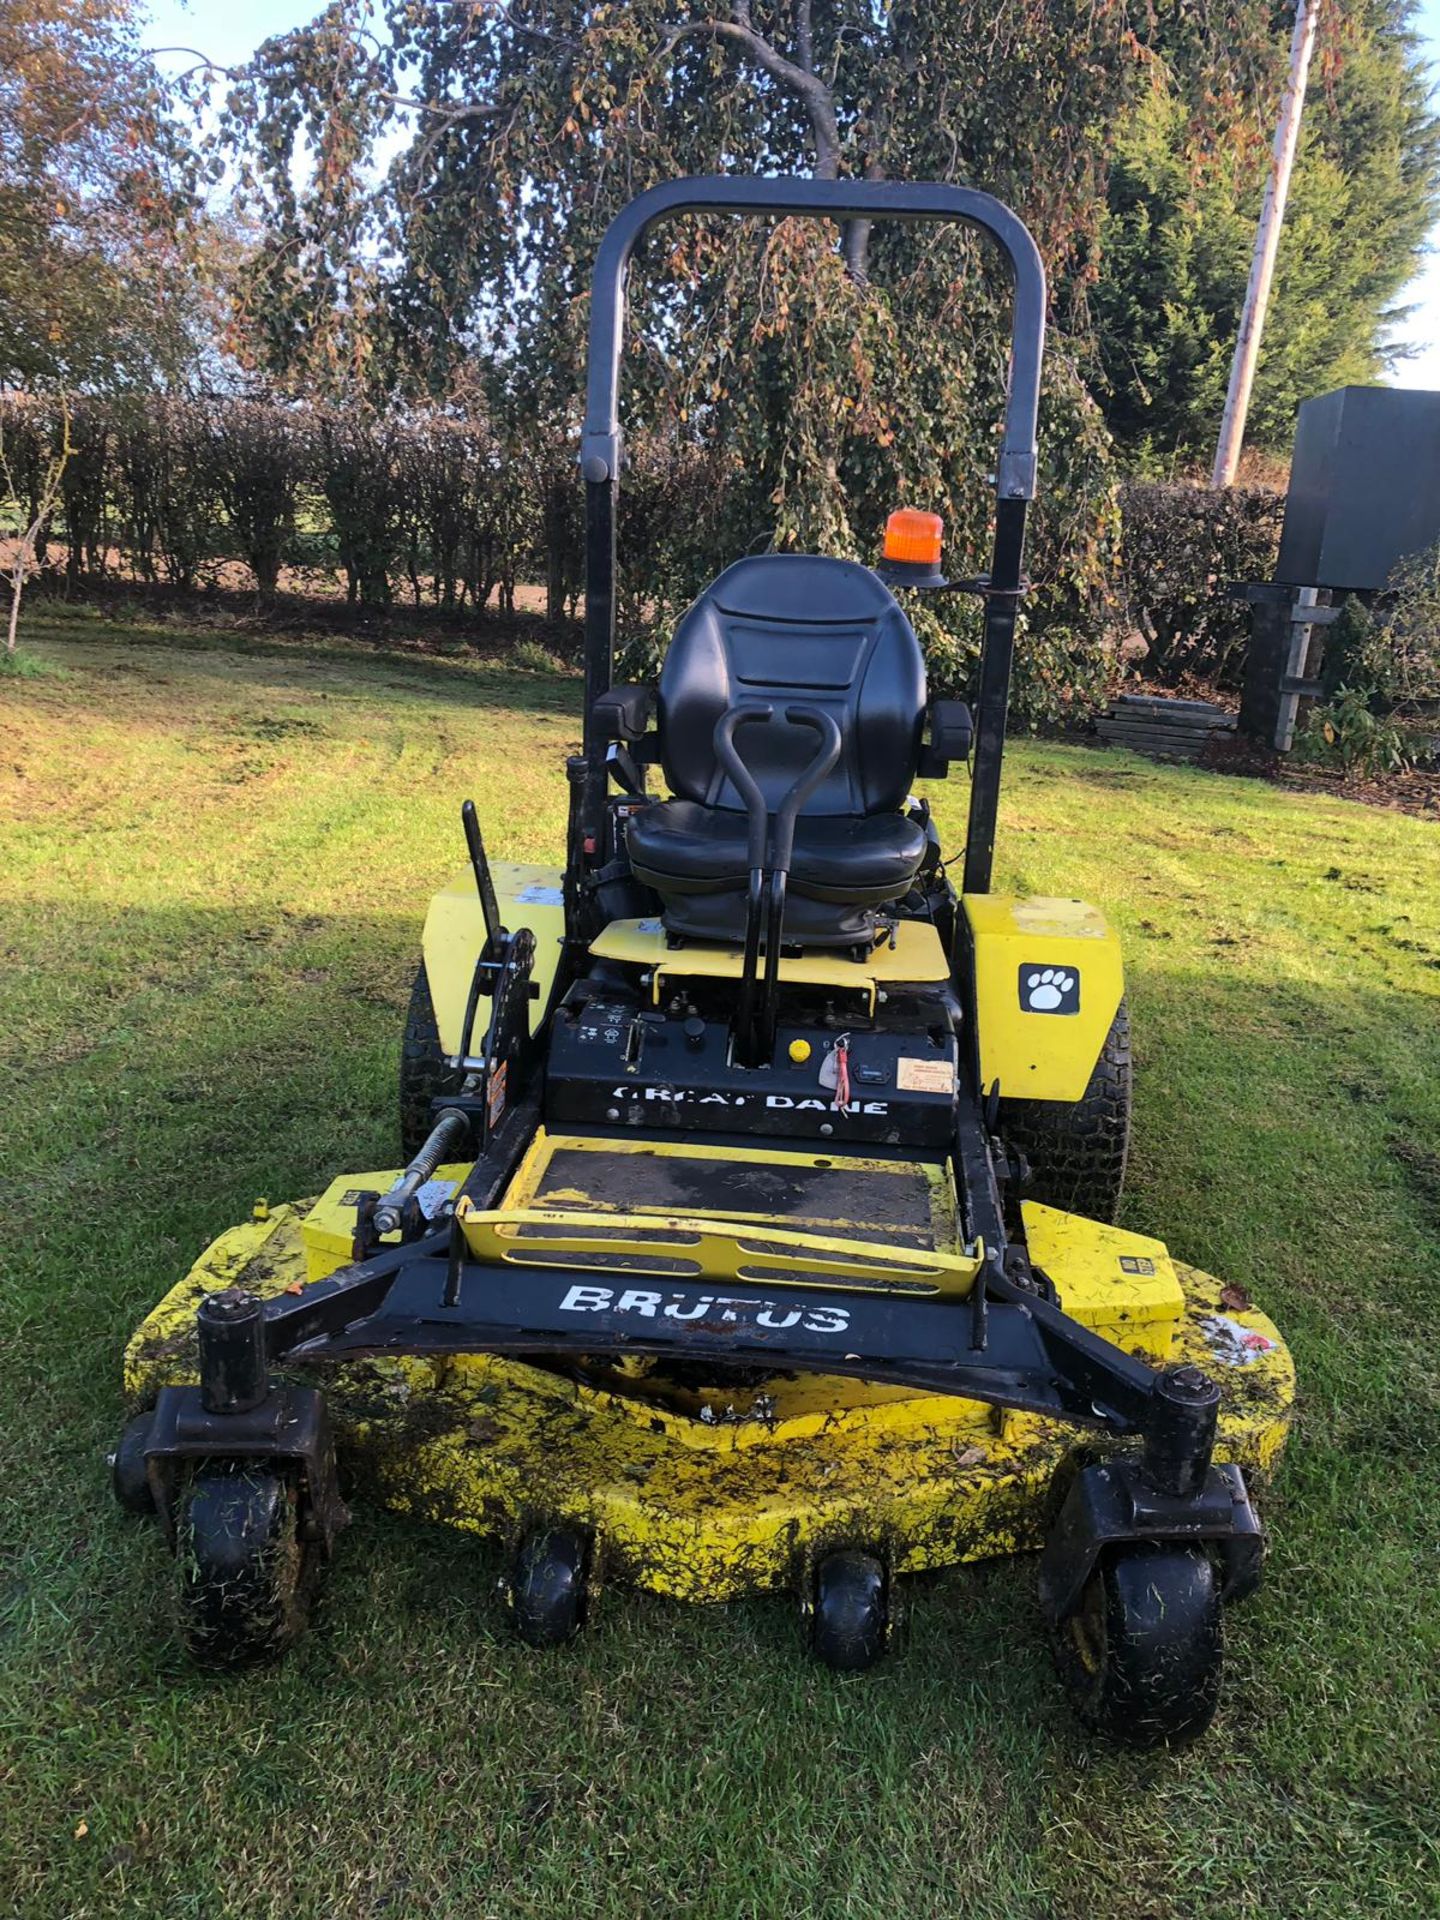 2012/12 REG GREAT DANE BRUTUS RIDE ON PETROL LAWN MOWER WITH DELUXE SEAT AND ROLL BAR *PLUS VAT* - Image 4 of 16